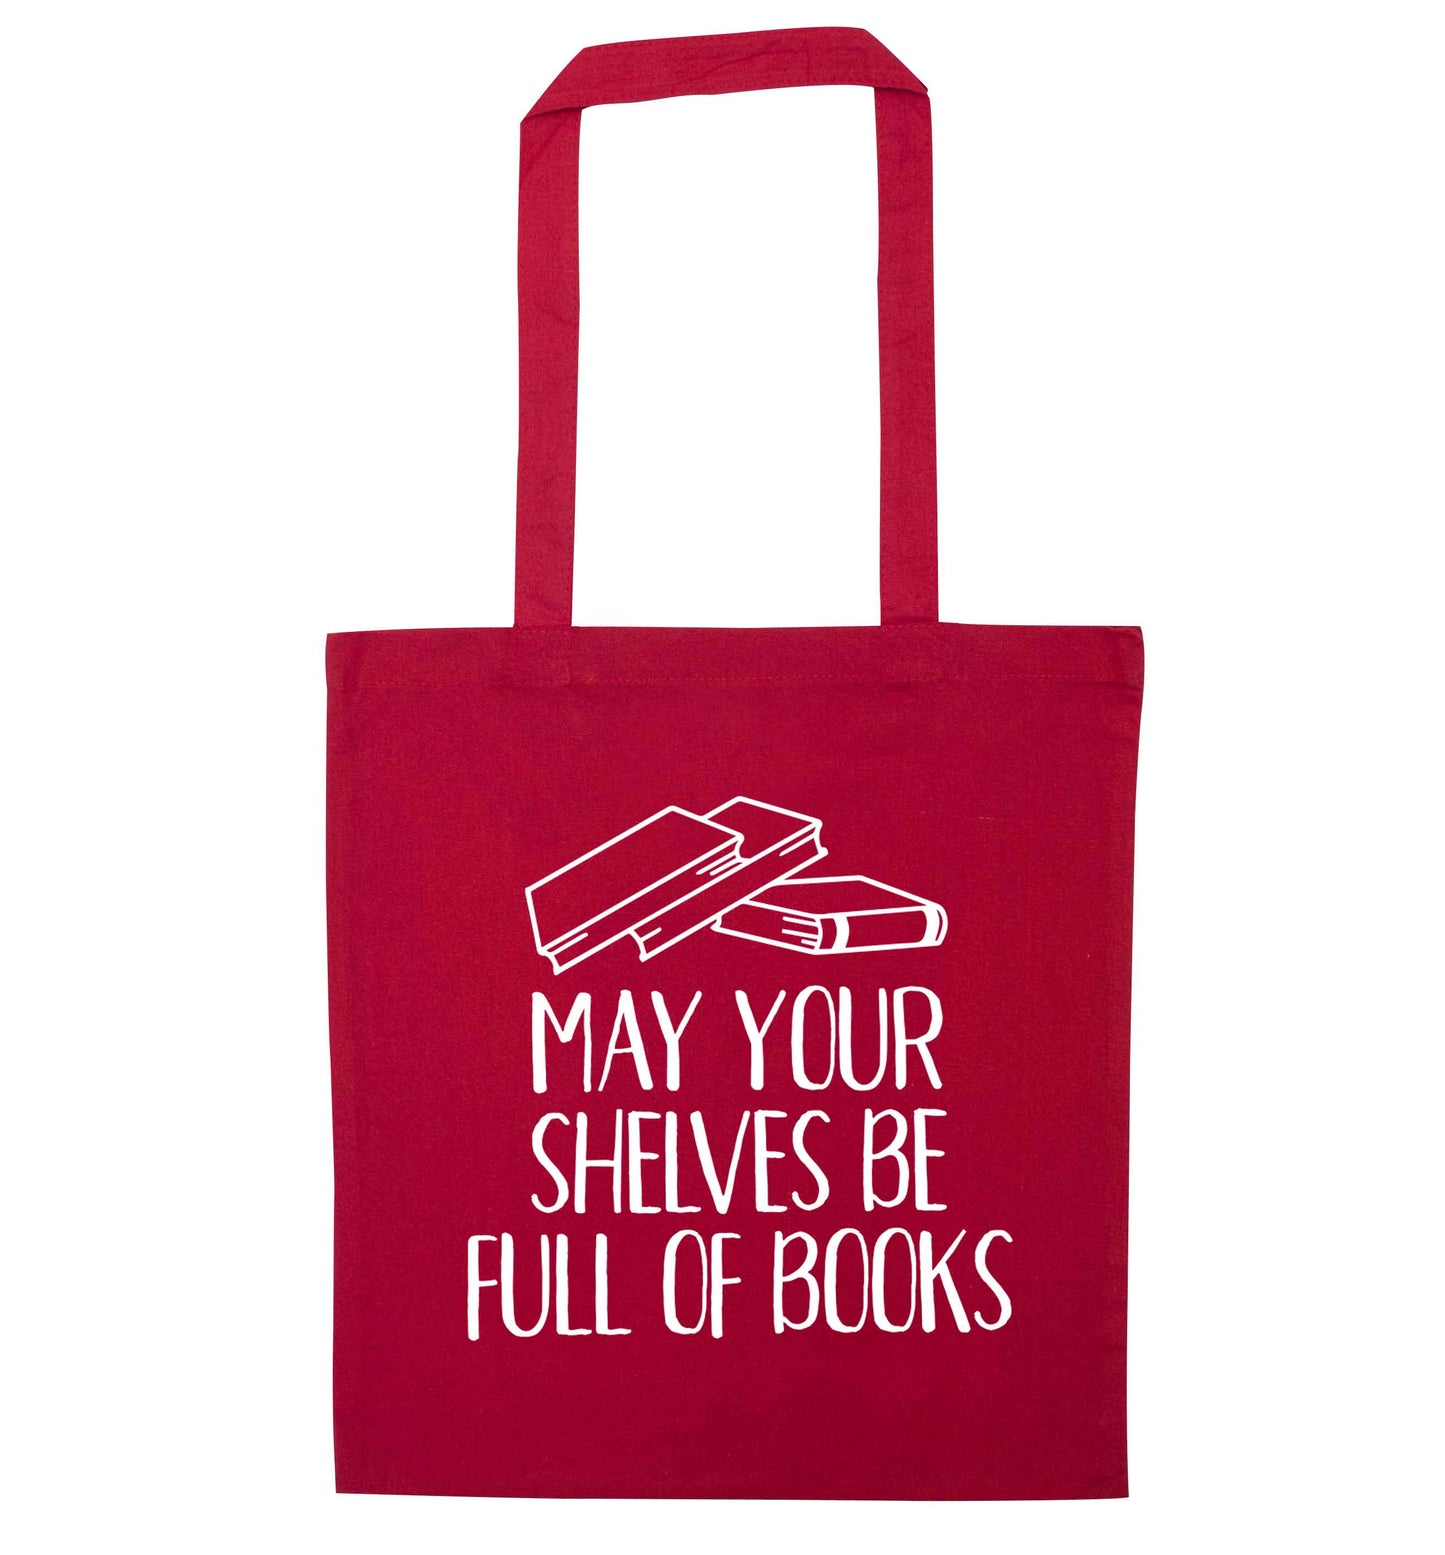 May your shelves be full of books red tote bag